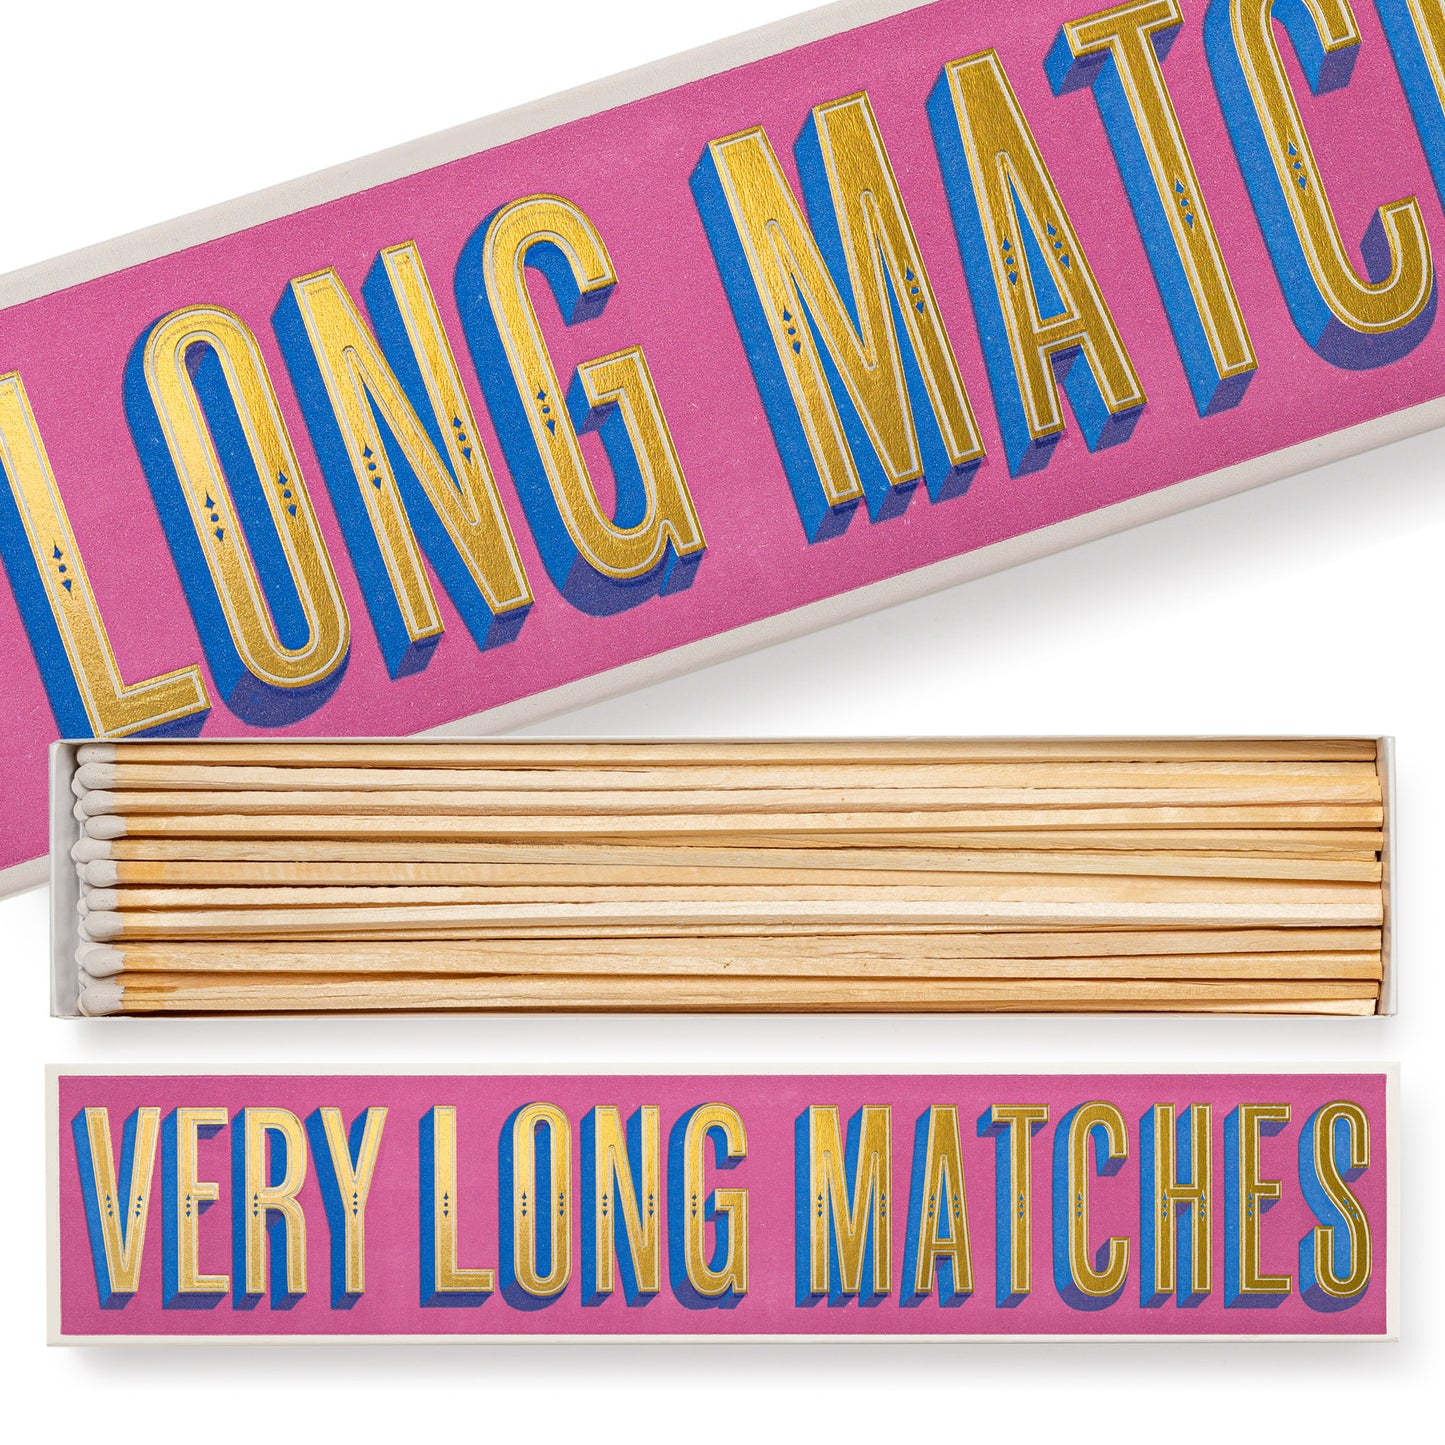 Worded matches bundle